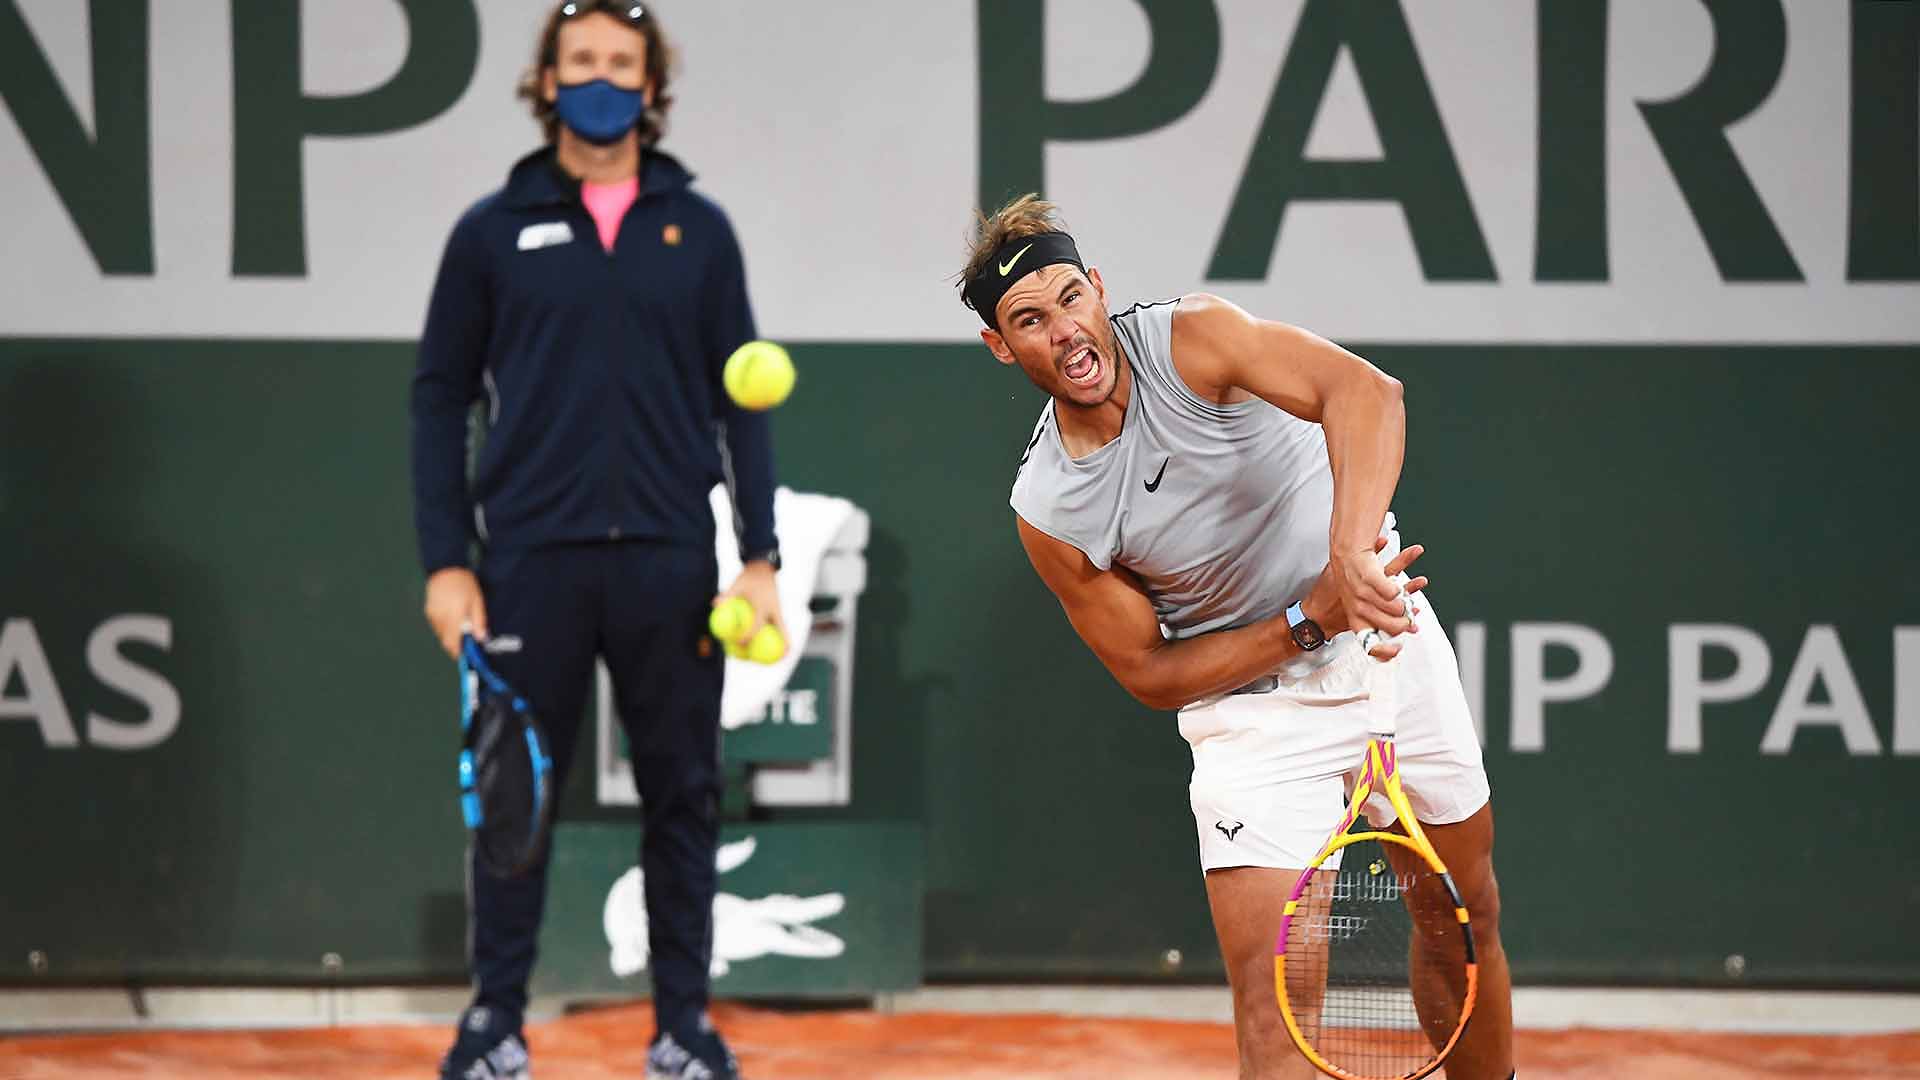 Rafael Nadal is attempting to capture a record-equalling 20th Grand Slam title at Roland Garros.